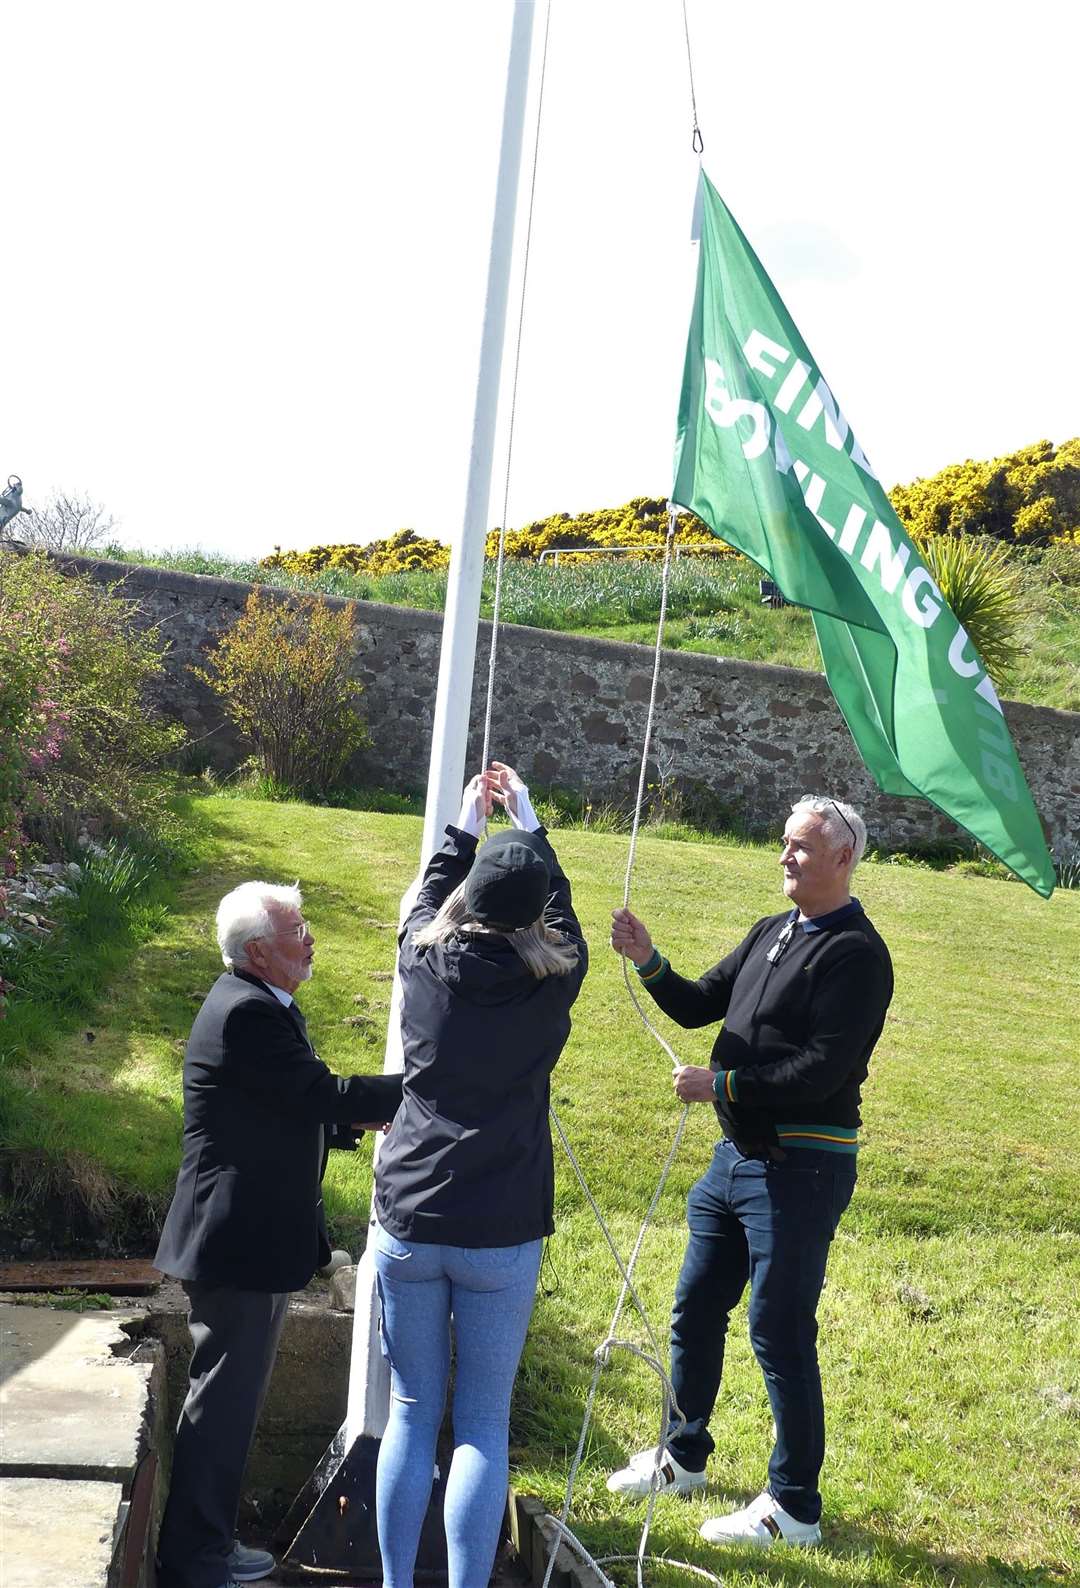 Club president Jim Gardner assists Vanessa and Ian Ramsay in unfurling the Findochty flag. Photo: Peter MacDonald